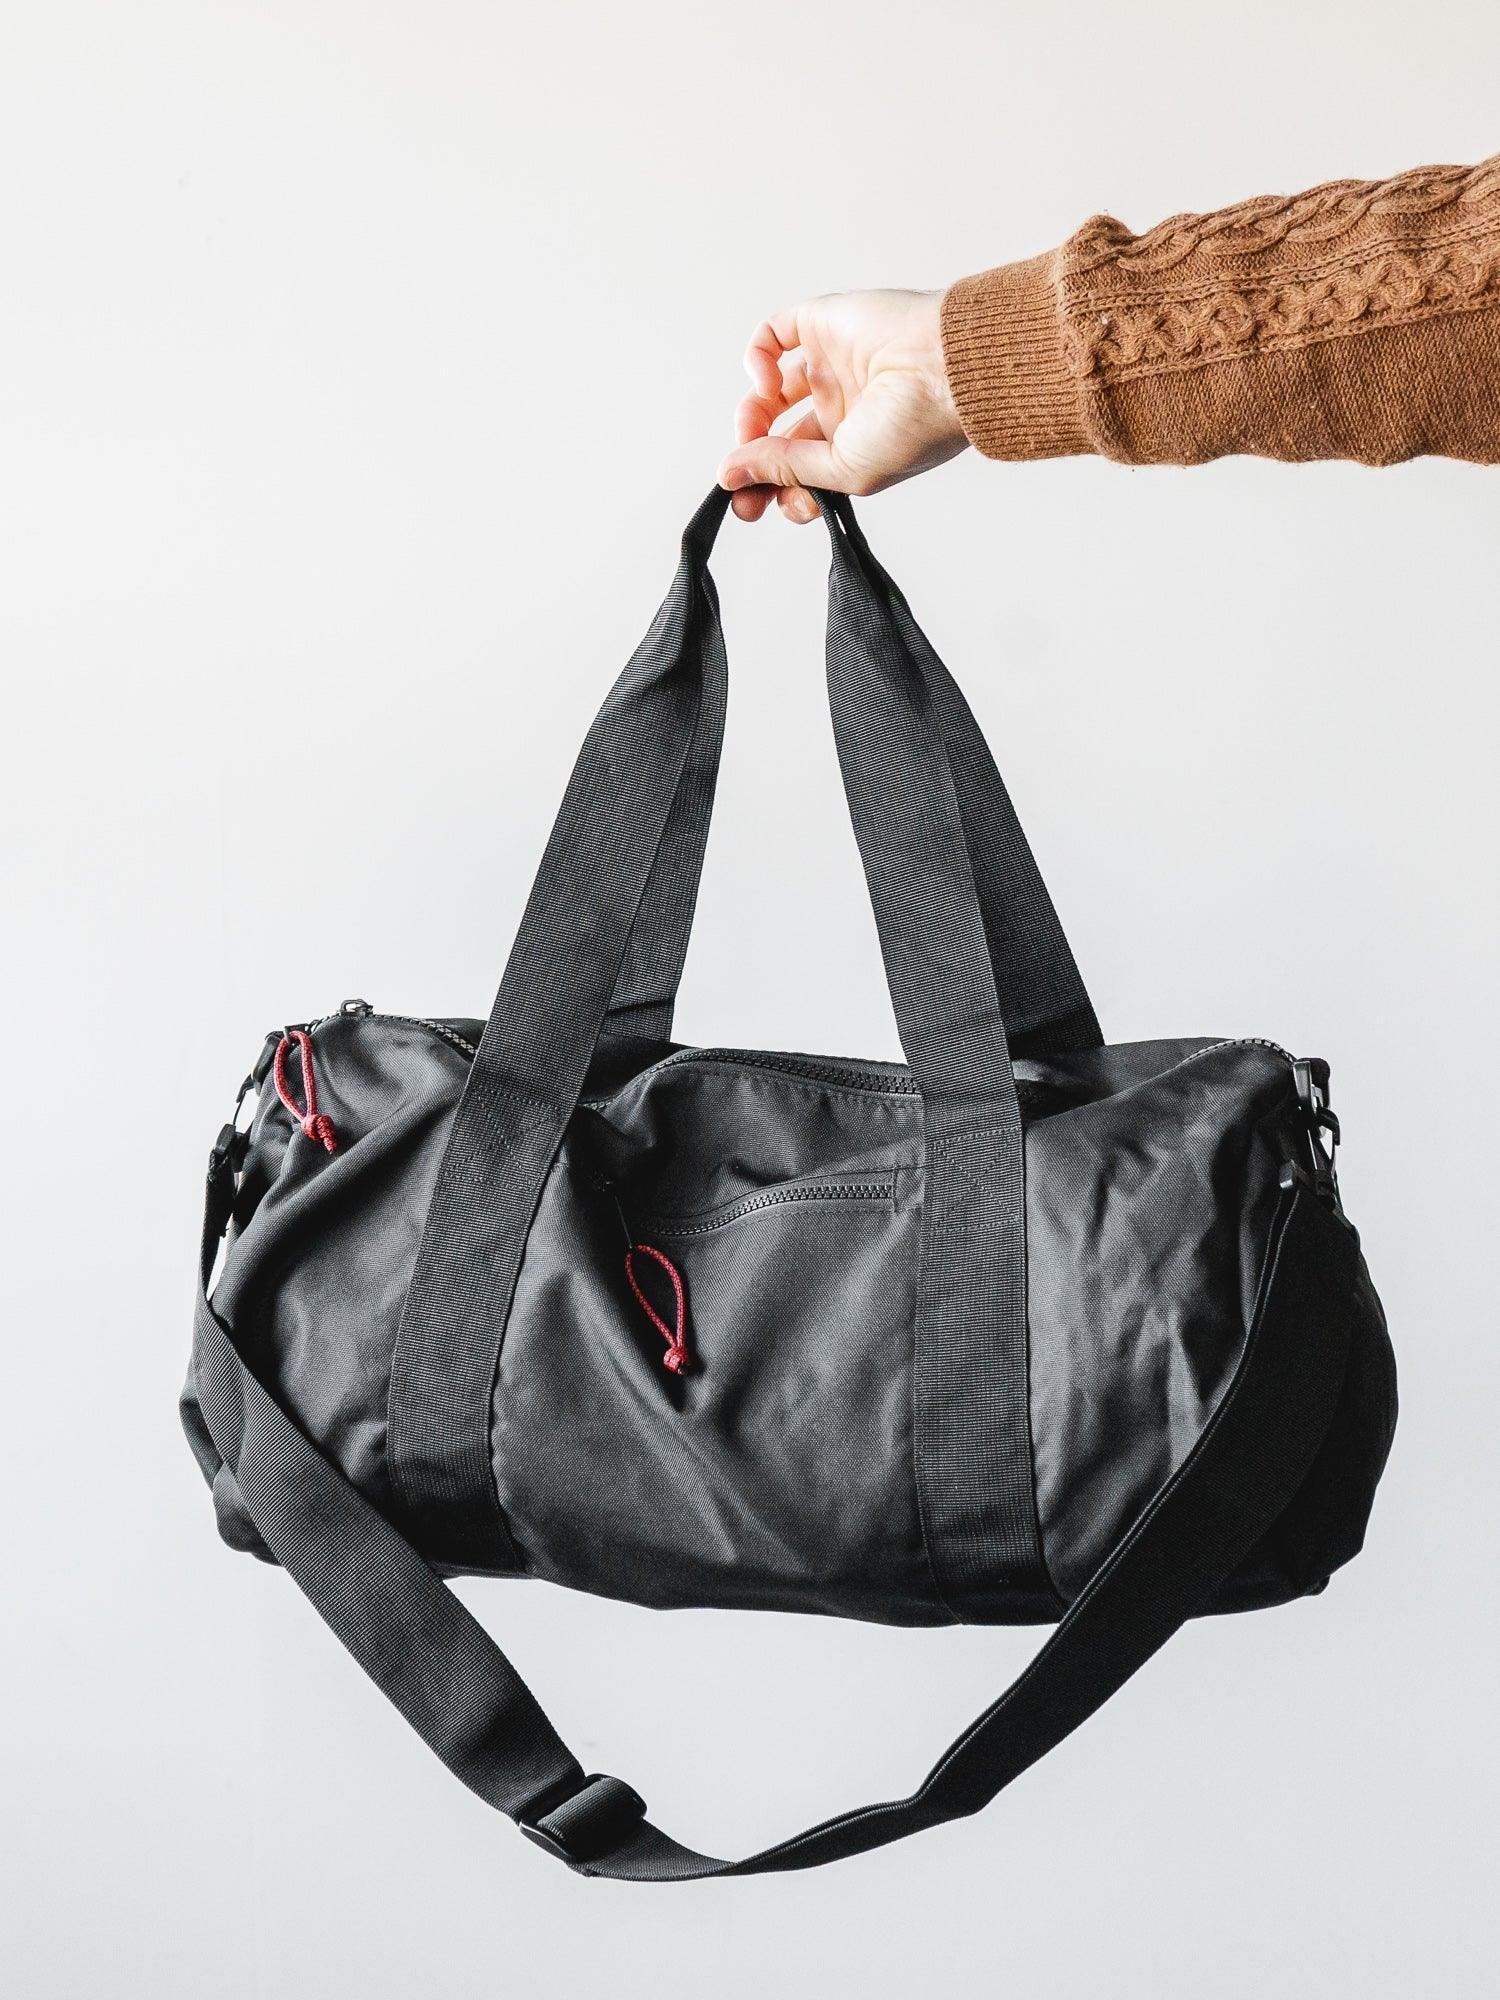 Watershed Recycled Union Duffle Bag - Black